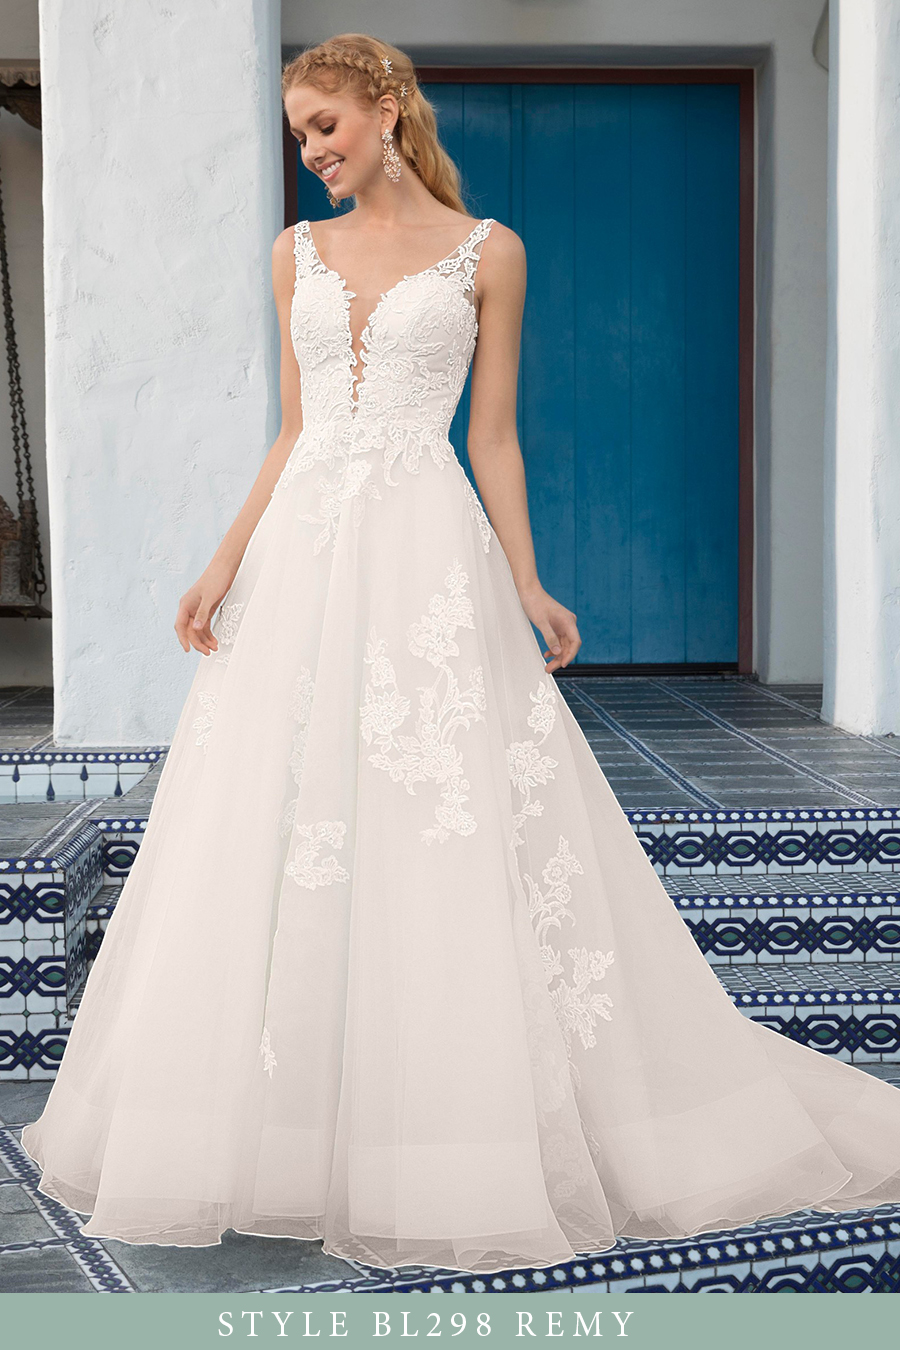 NEW Beloved by Casablanca Bridal Fall 2019 Collection: Adored In Morocco | Affordable Bohemian Classic Wedding Dresses